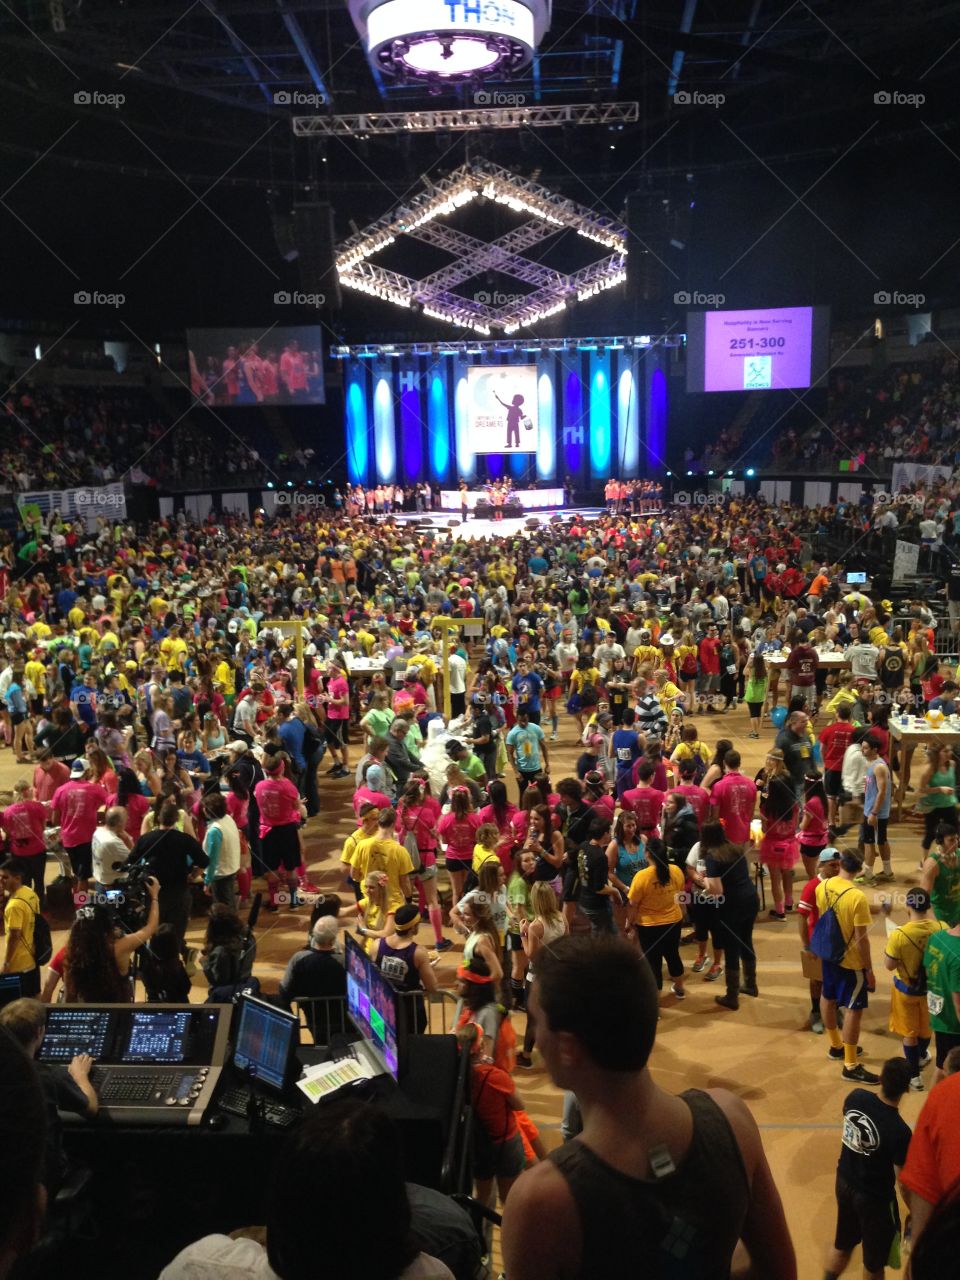 For the Kids. Dancers at THON 2015.